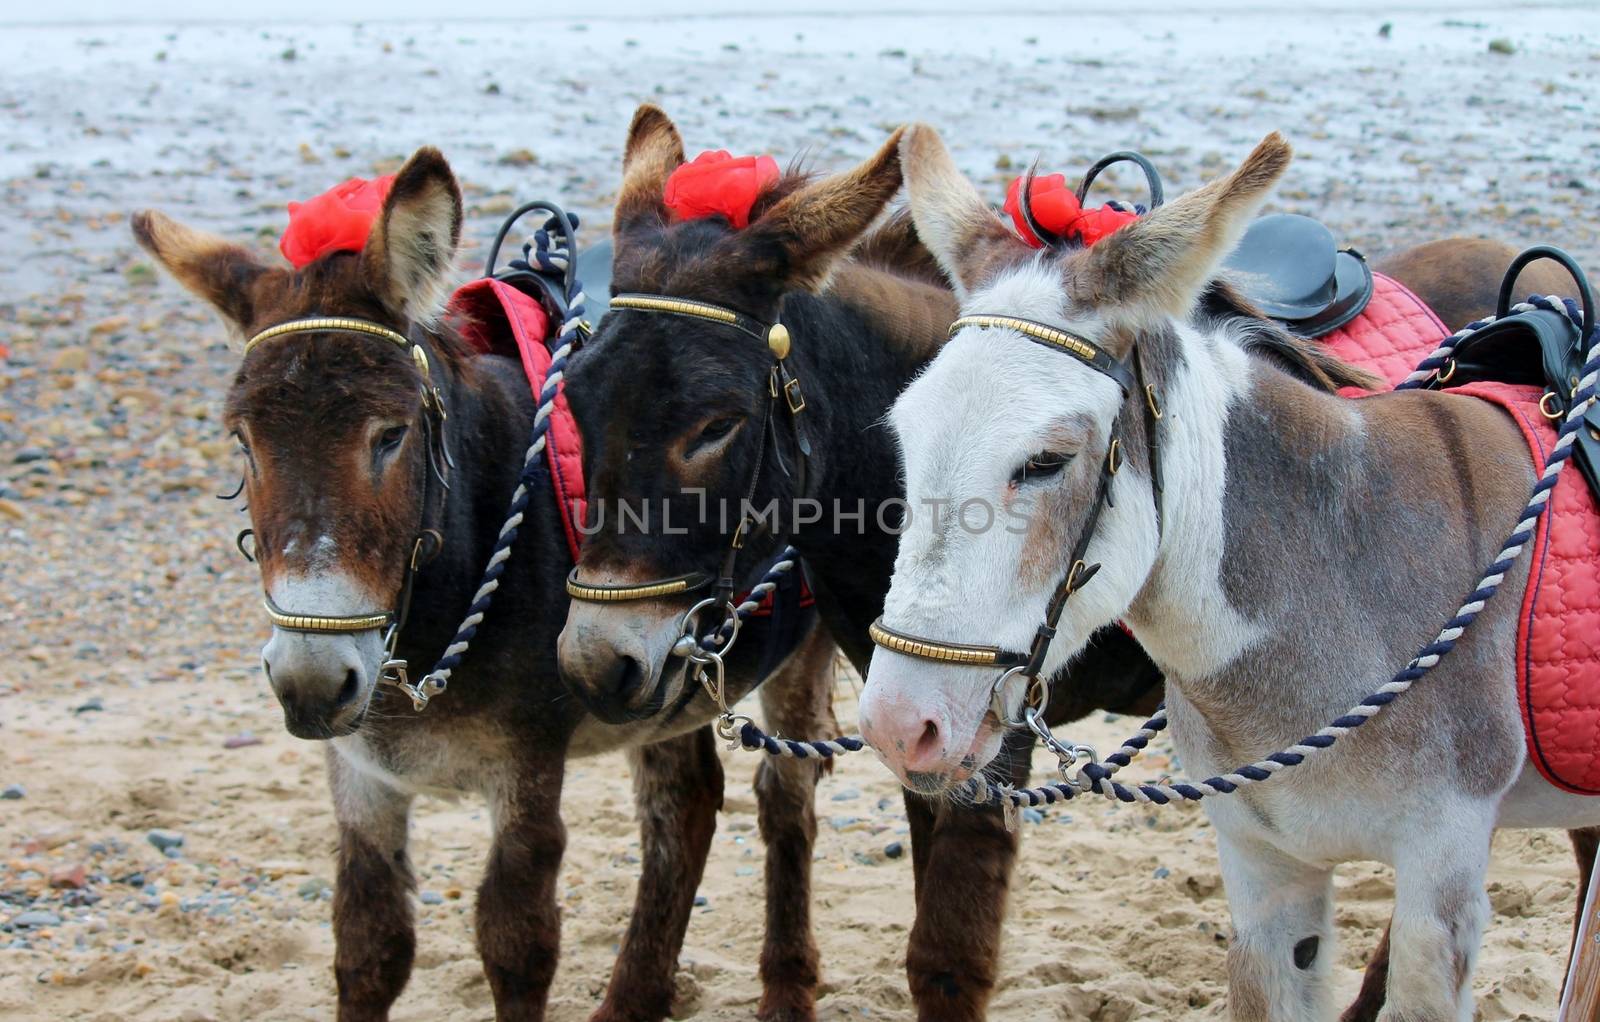 Seaside donkeys at the beach in England UK by cheekylorns